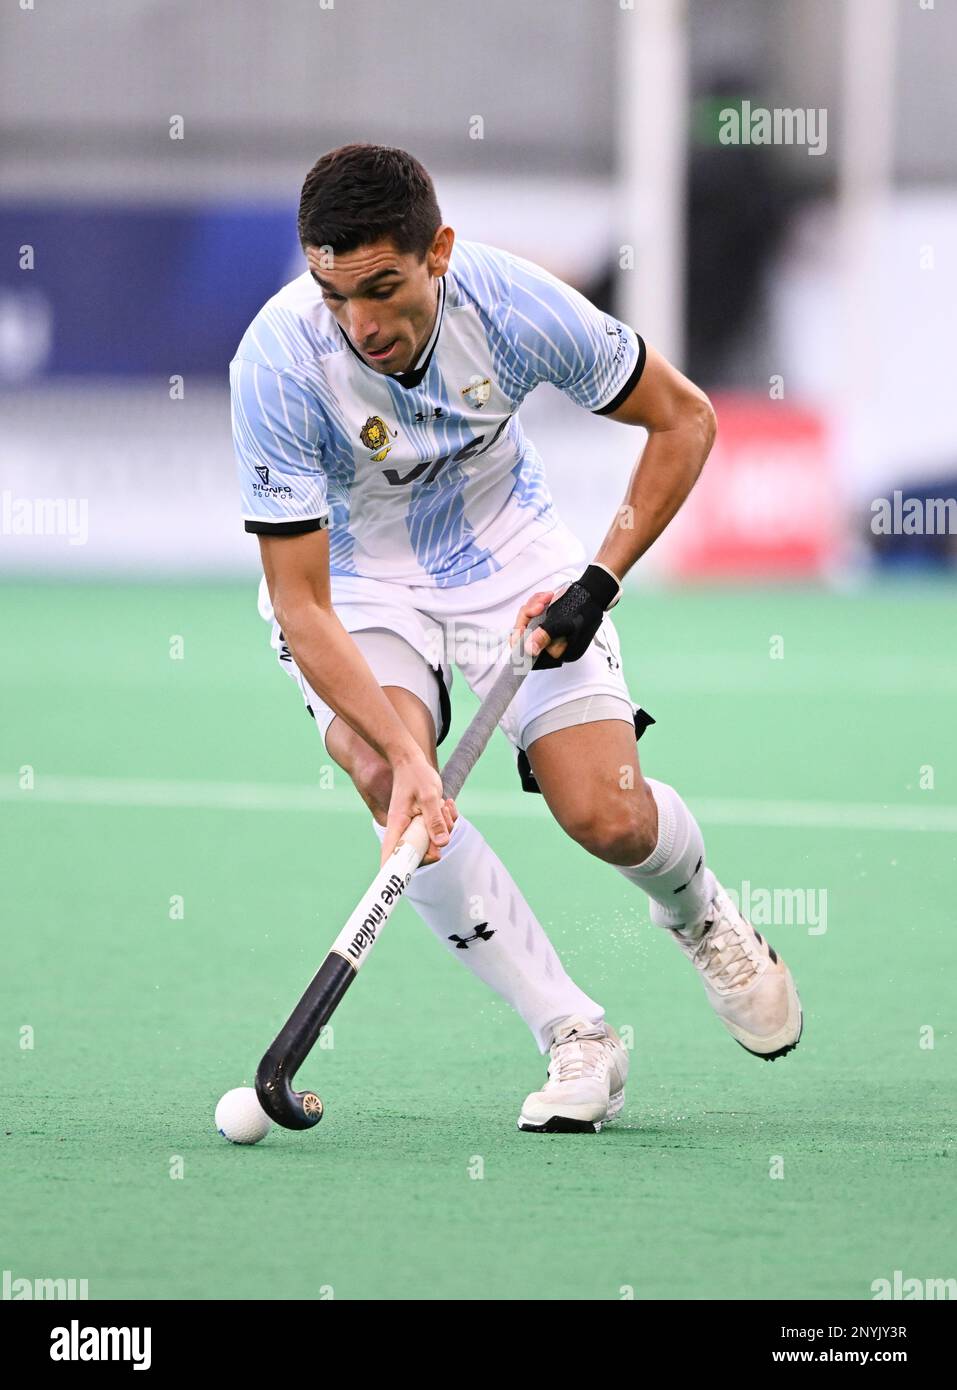 Hobart, Australia. 02nd Mar, 2023. Federico Fernandez of Argentina Men's National field hockey team in action during the 2022/23 International Hockey Federation (FIH) Men's Pro-League match between Argentina and Spain held at the Tasmanian Hockey Centre in Hobart. Final score Spain 4:3 Argentina. Credit: SOPA Images Limited/Alamy Live News Stock Photo